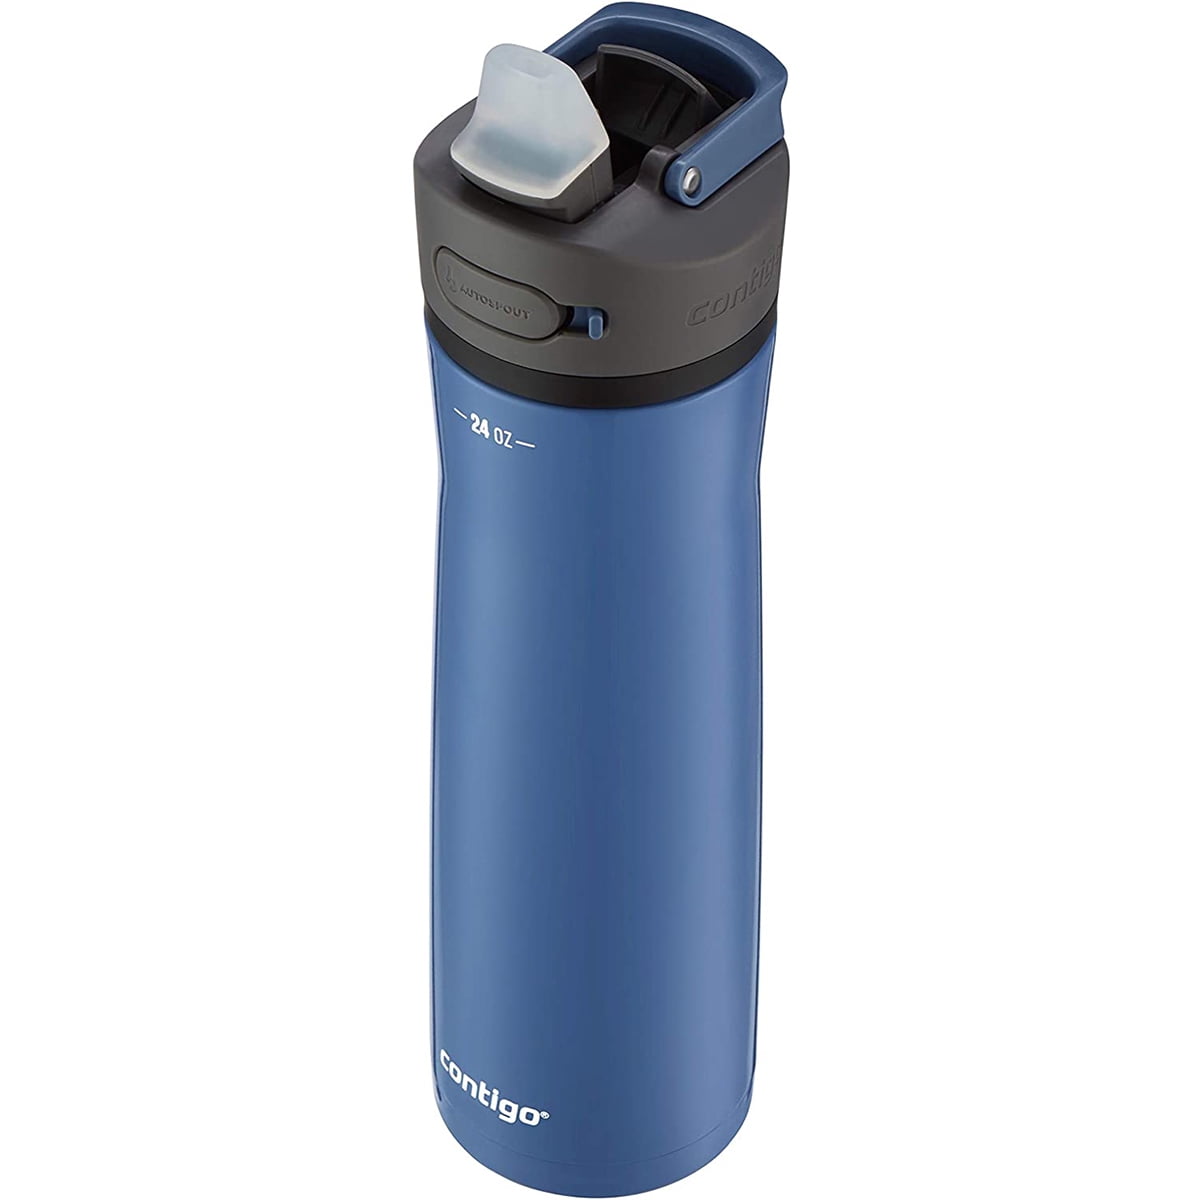 Contigo water bottle: Get the Jackson Chill 2.0 at Walgreens today